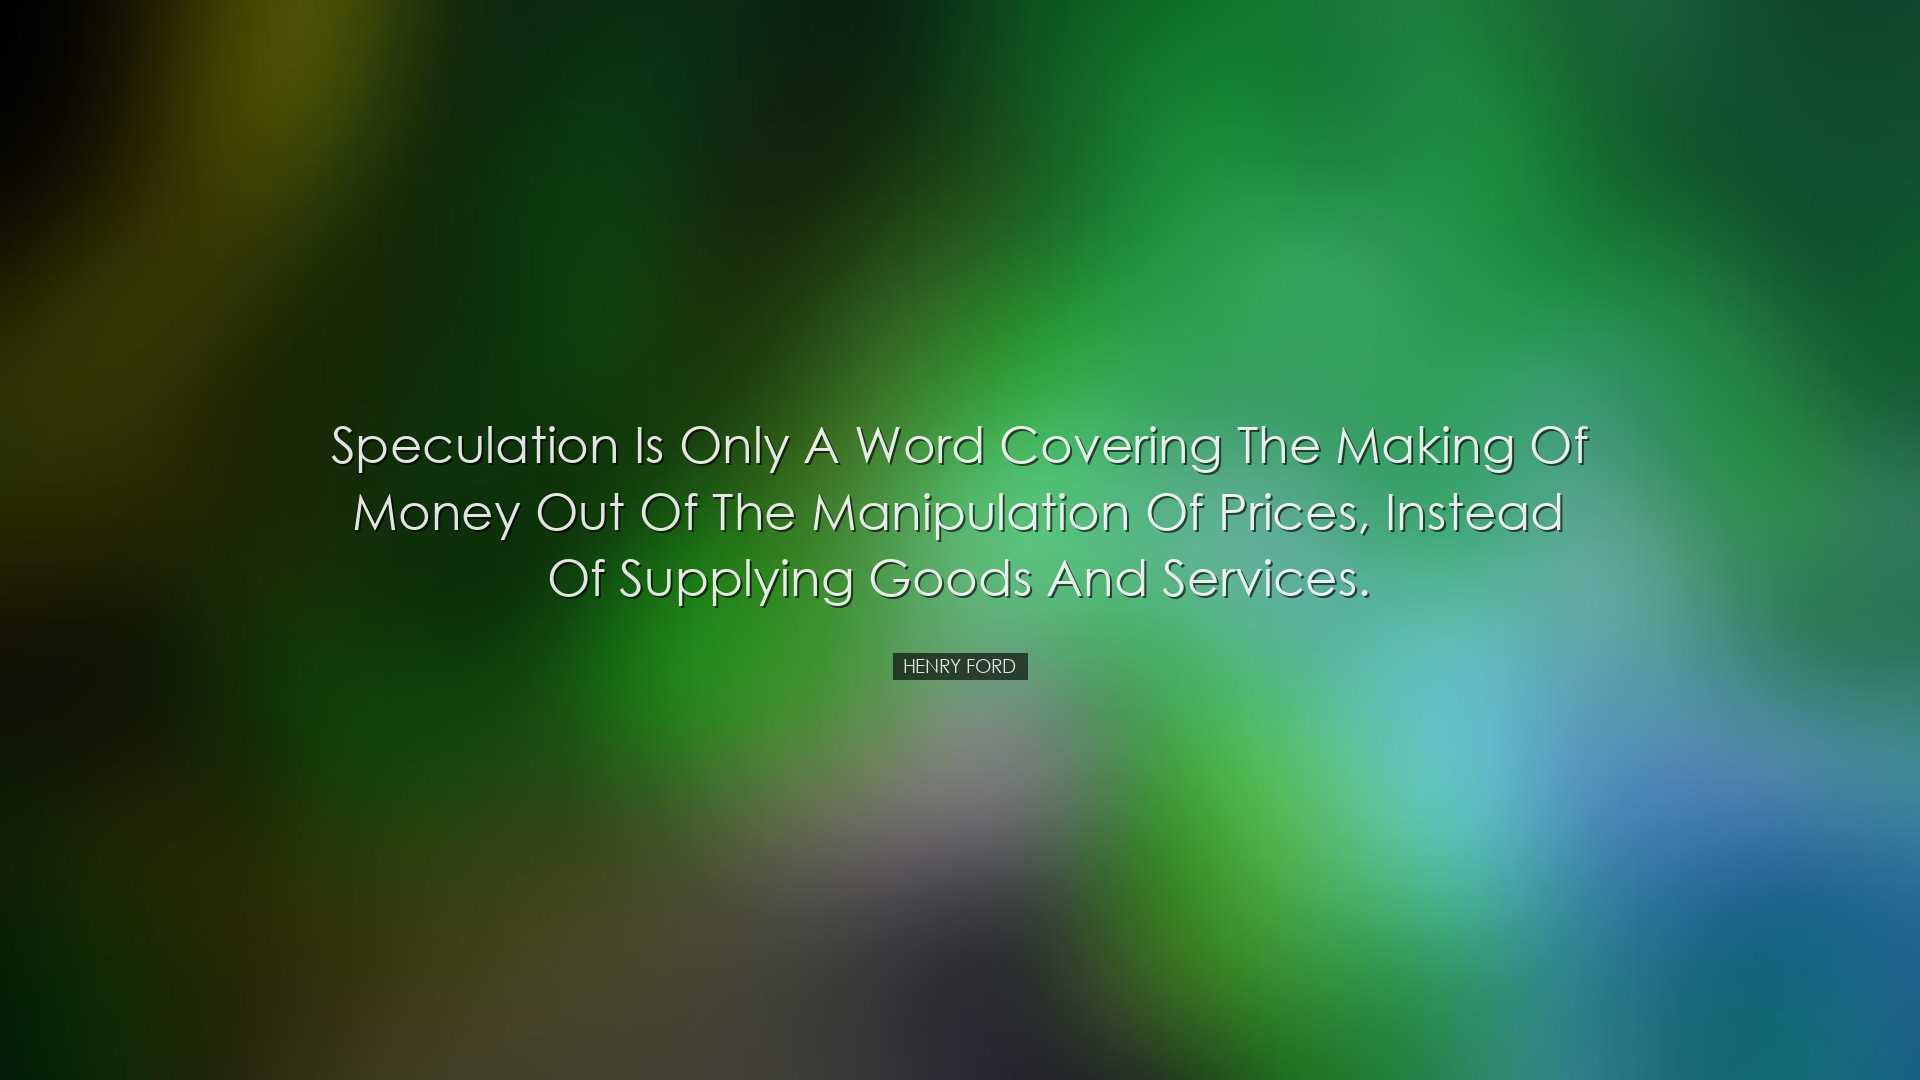 Speculation is only a word covering the making of money out of the